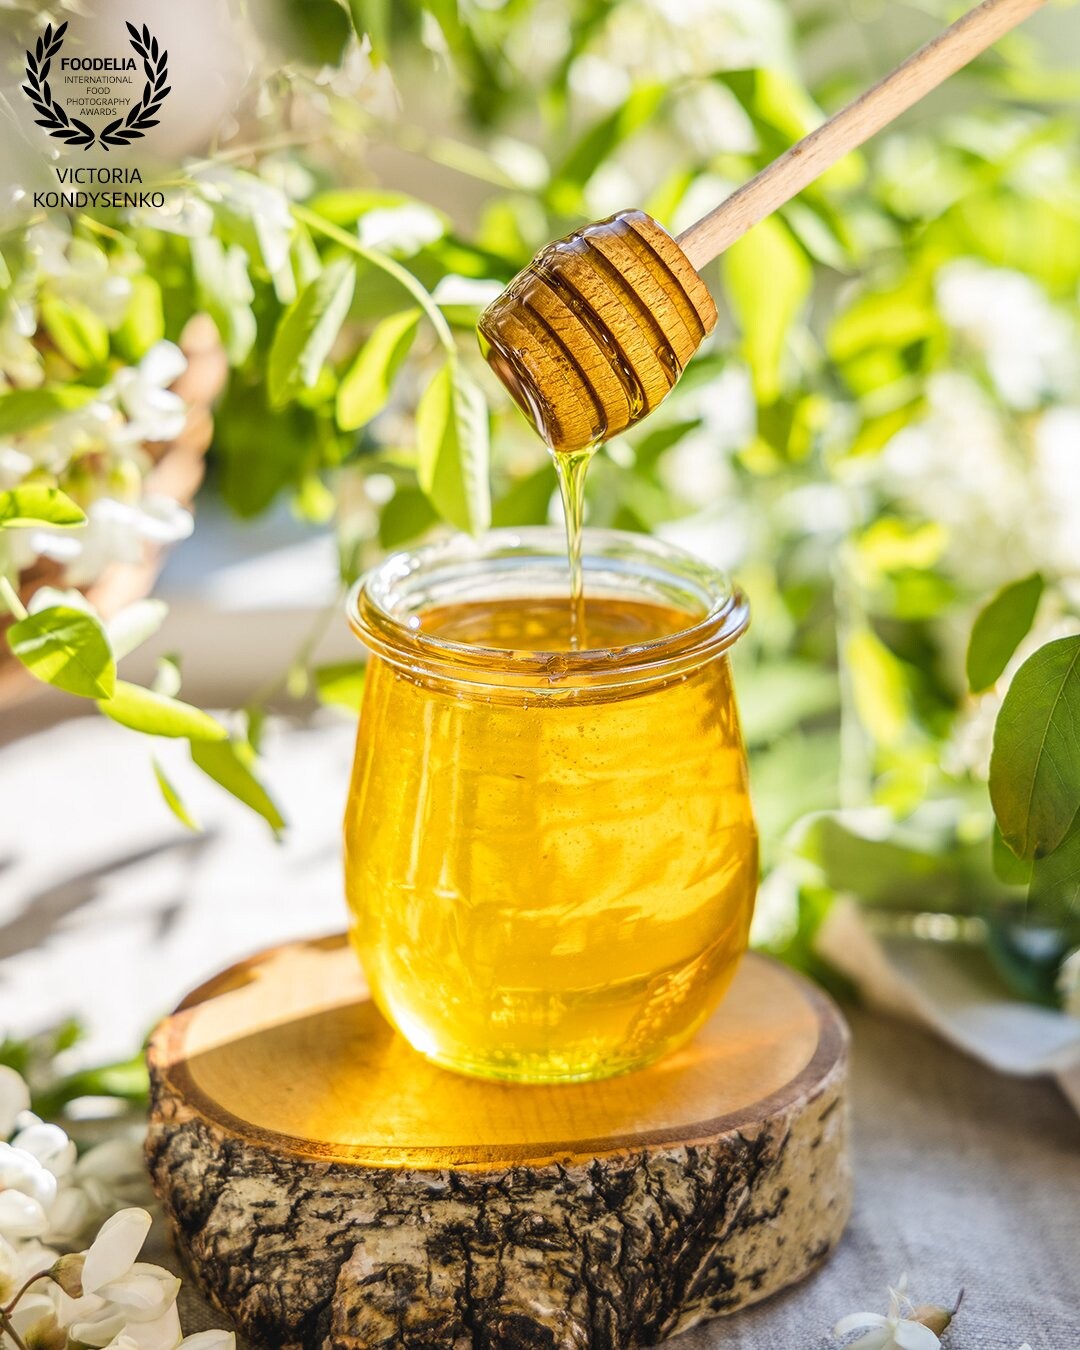 Sweet honey jar surrounded spring acacia blossoms. Honey flows from a spoon in a jar. Natural sunlight.<br />
Advertising shooting for a local farm